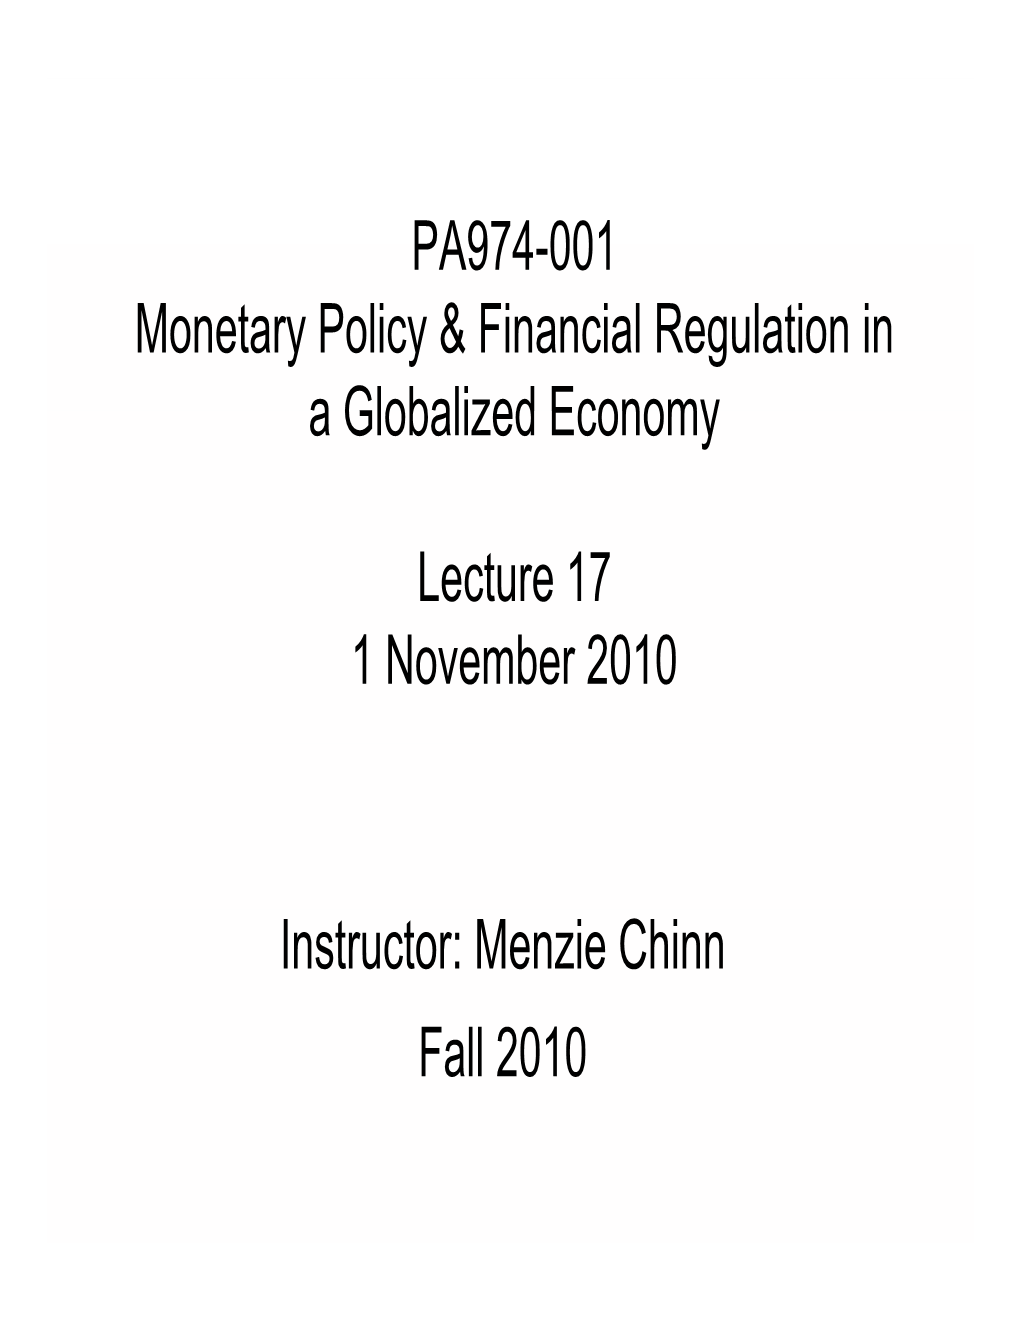 PA974 001-001 Monetary Policy & Financial Regulation in A